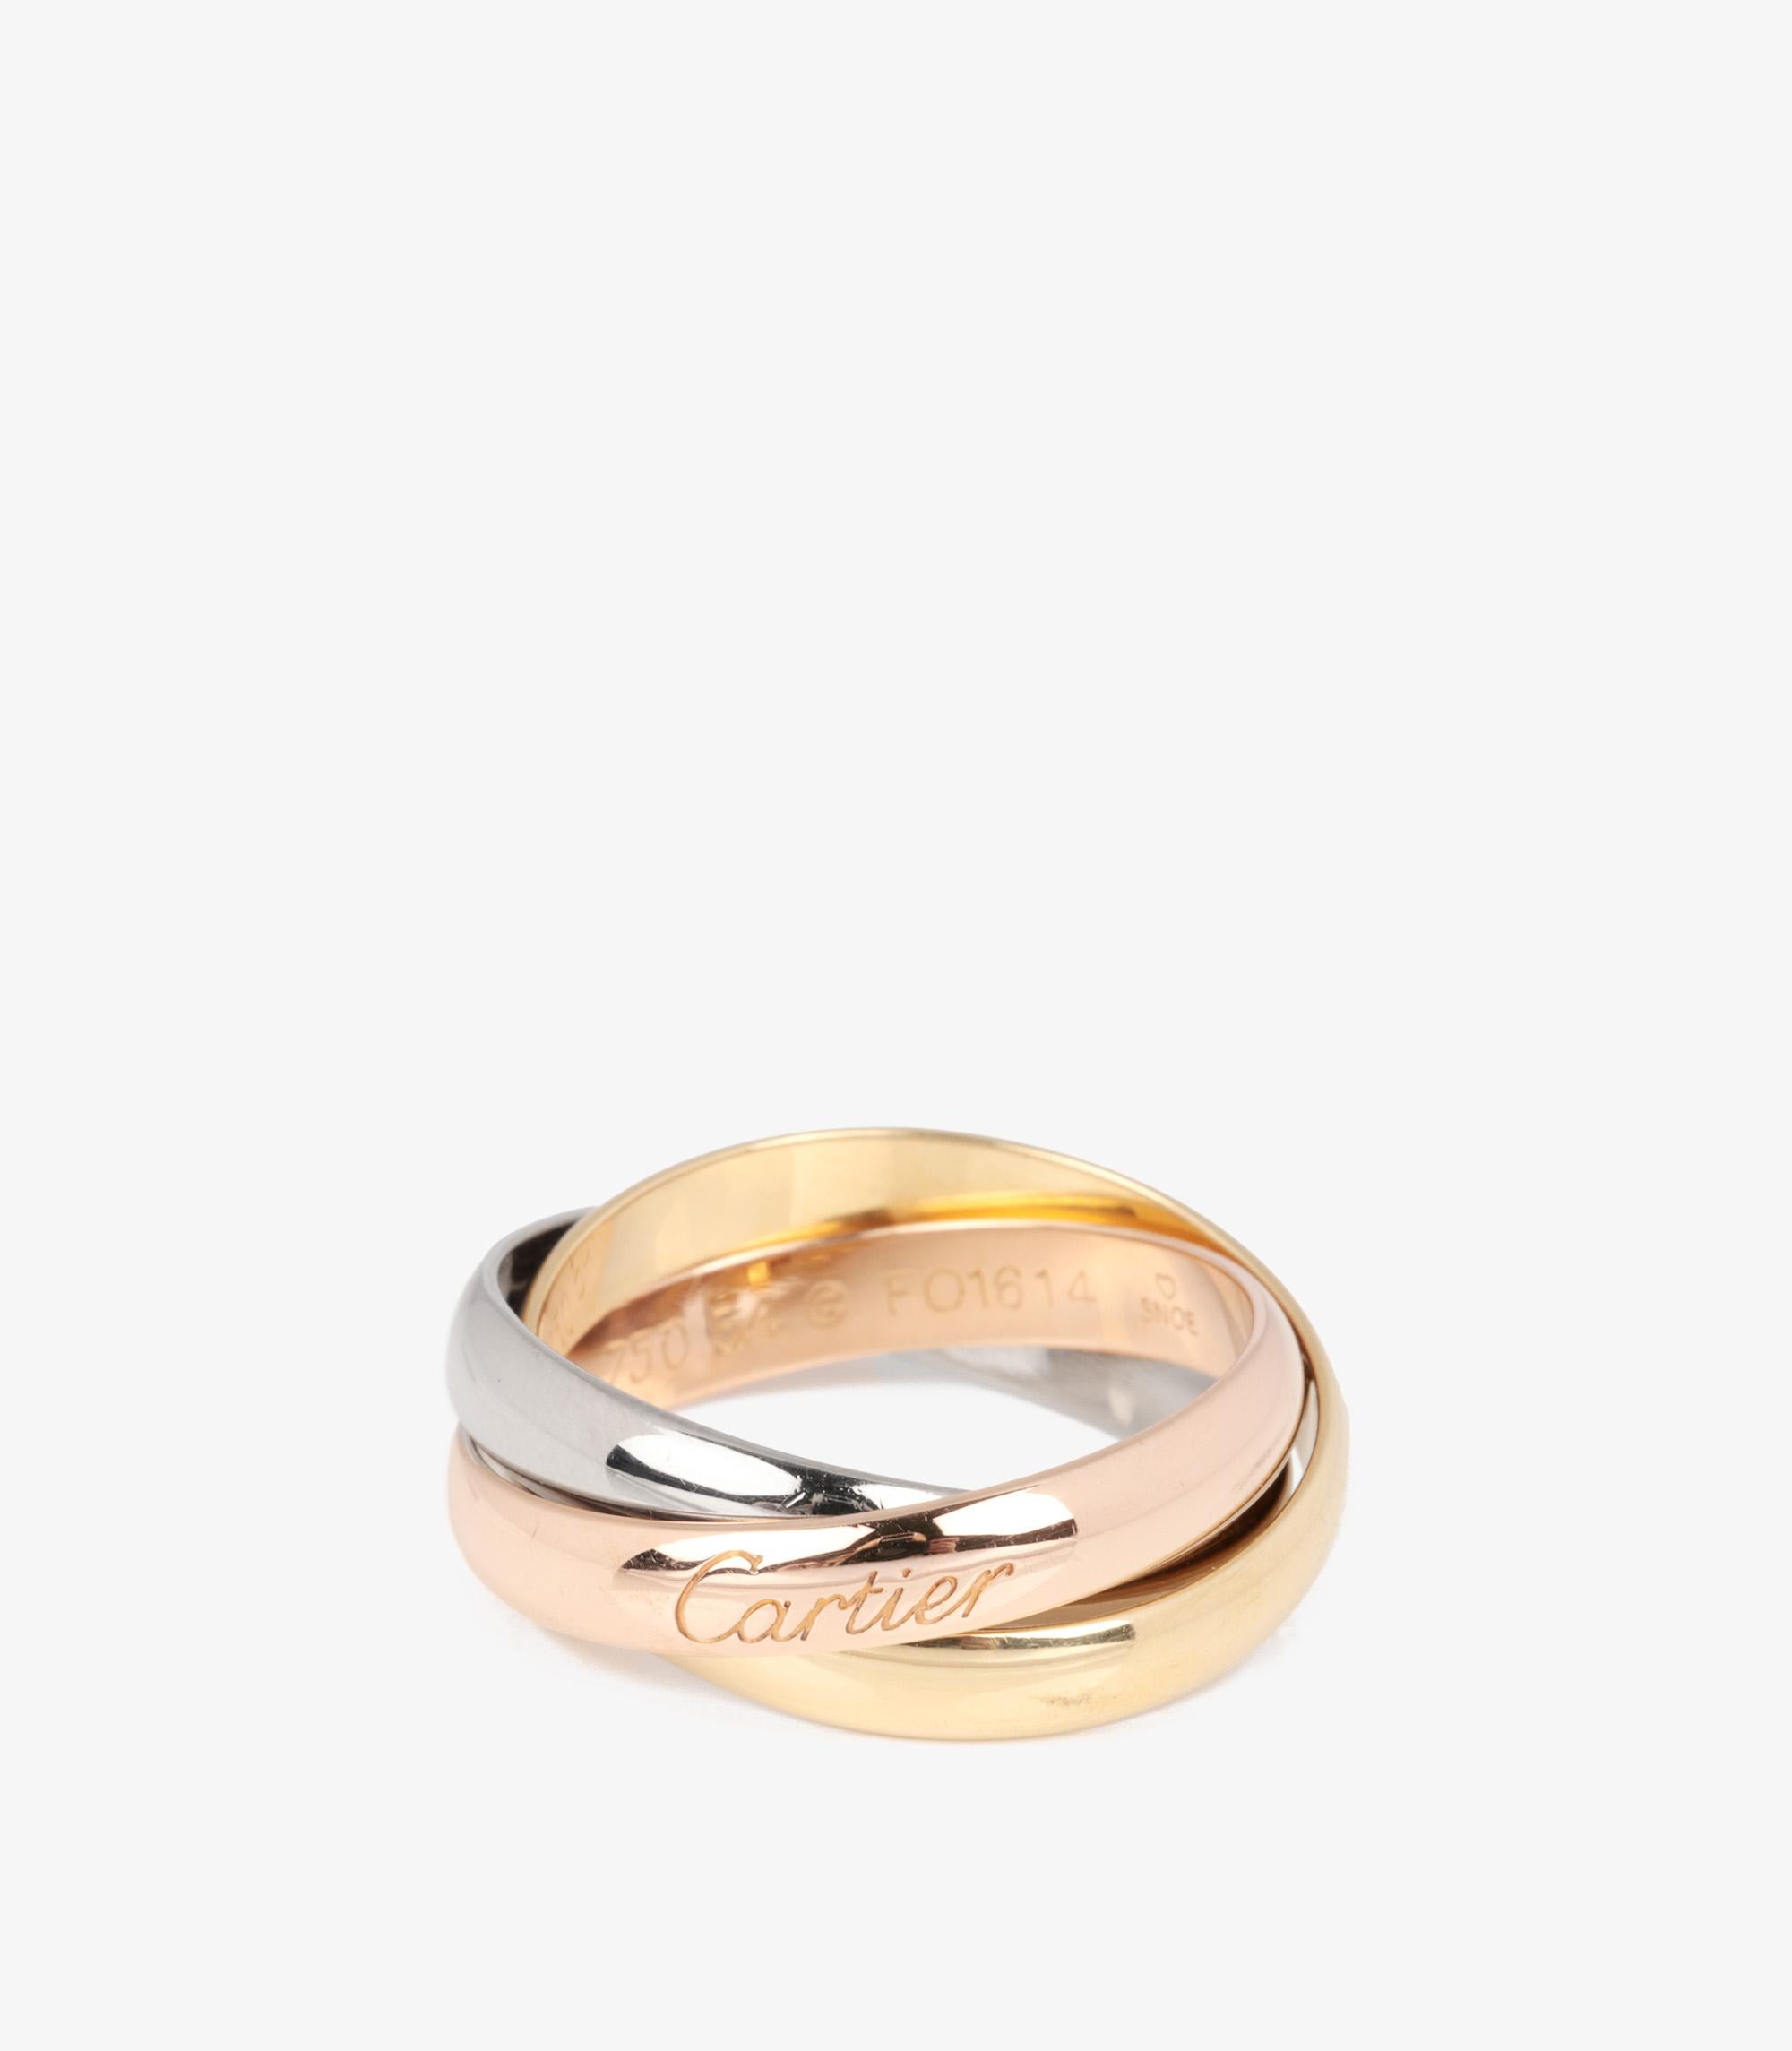 Cartier 18ct White Gold, 18ct Yellow Gold And 18ct Rose Gold Medium Trinity Ring

Brand- Cartier
Model- Medium Trinity Ring
Product Type- Ring
Serial Number- FO****
Material(s)- 18ct White Gold, 18ct Yellow Gold, 18ct Rose Gold
UK Ring Size- N